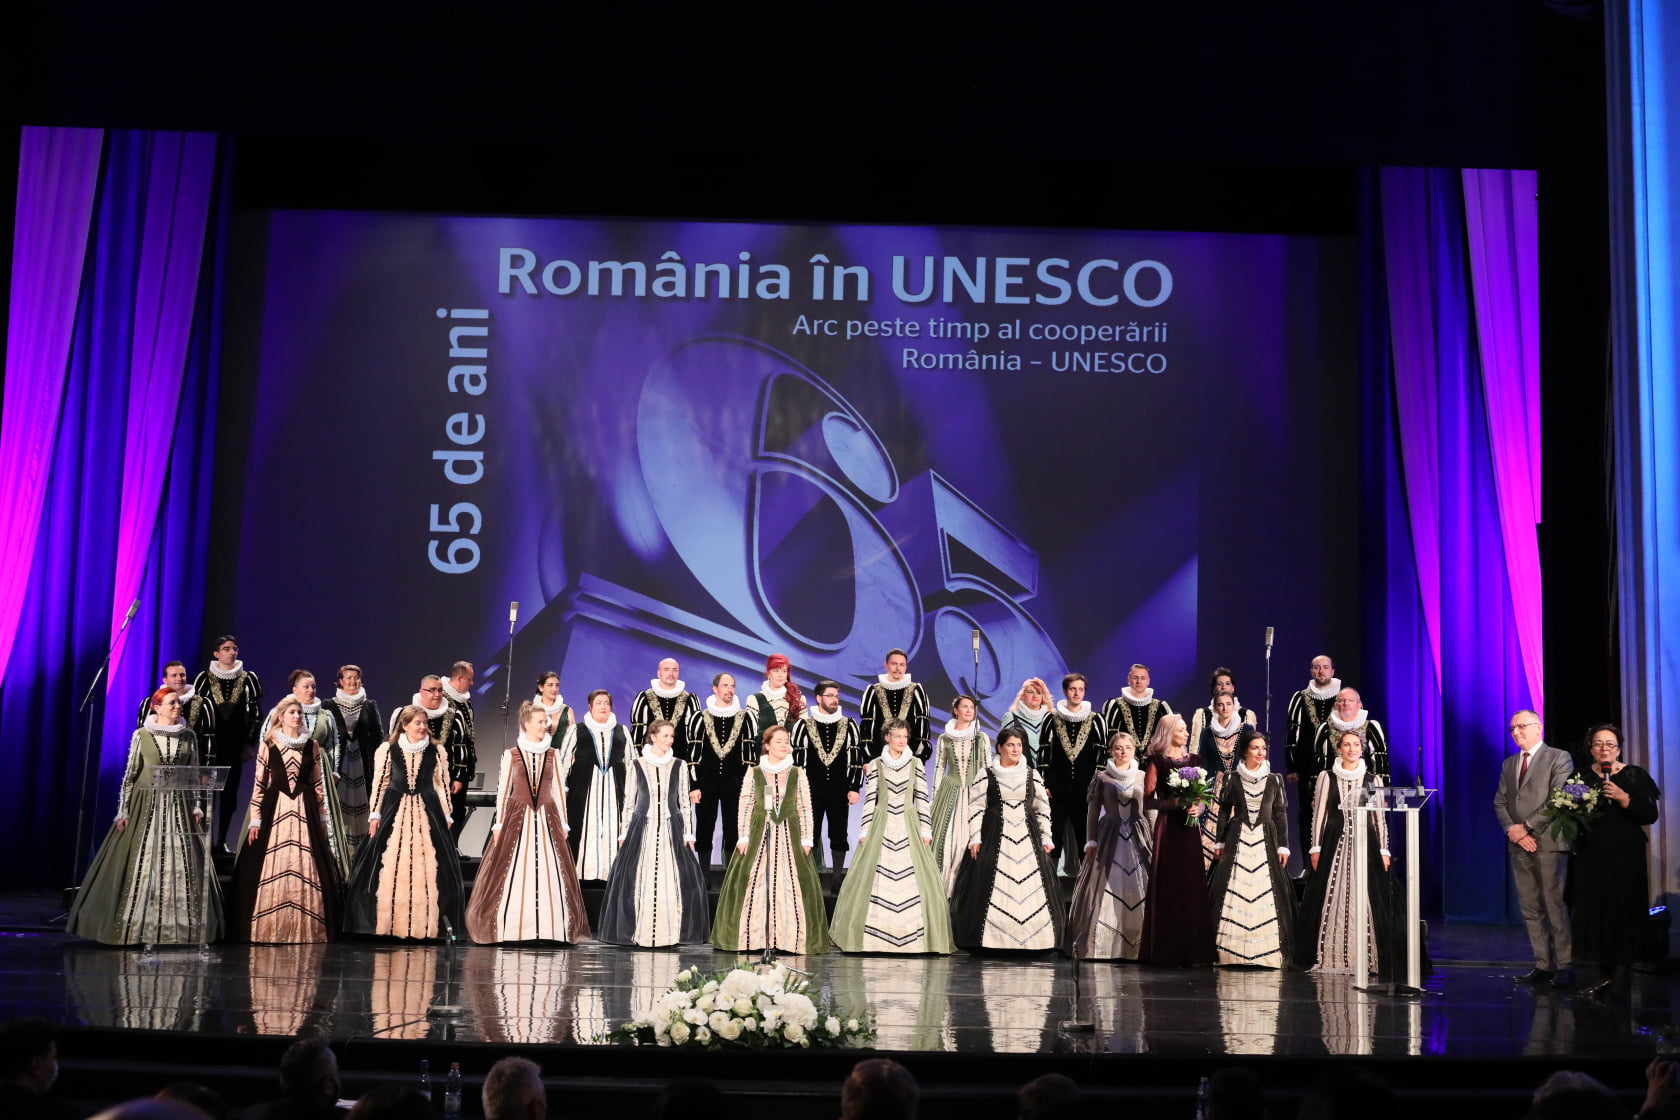 The National Commission of Romania for UNESCO Gala in the Centenary Year 2